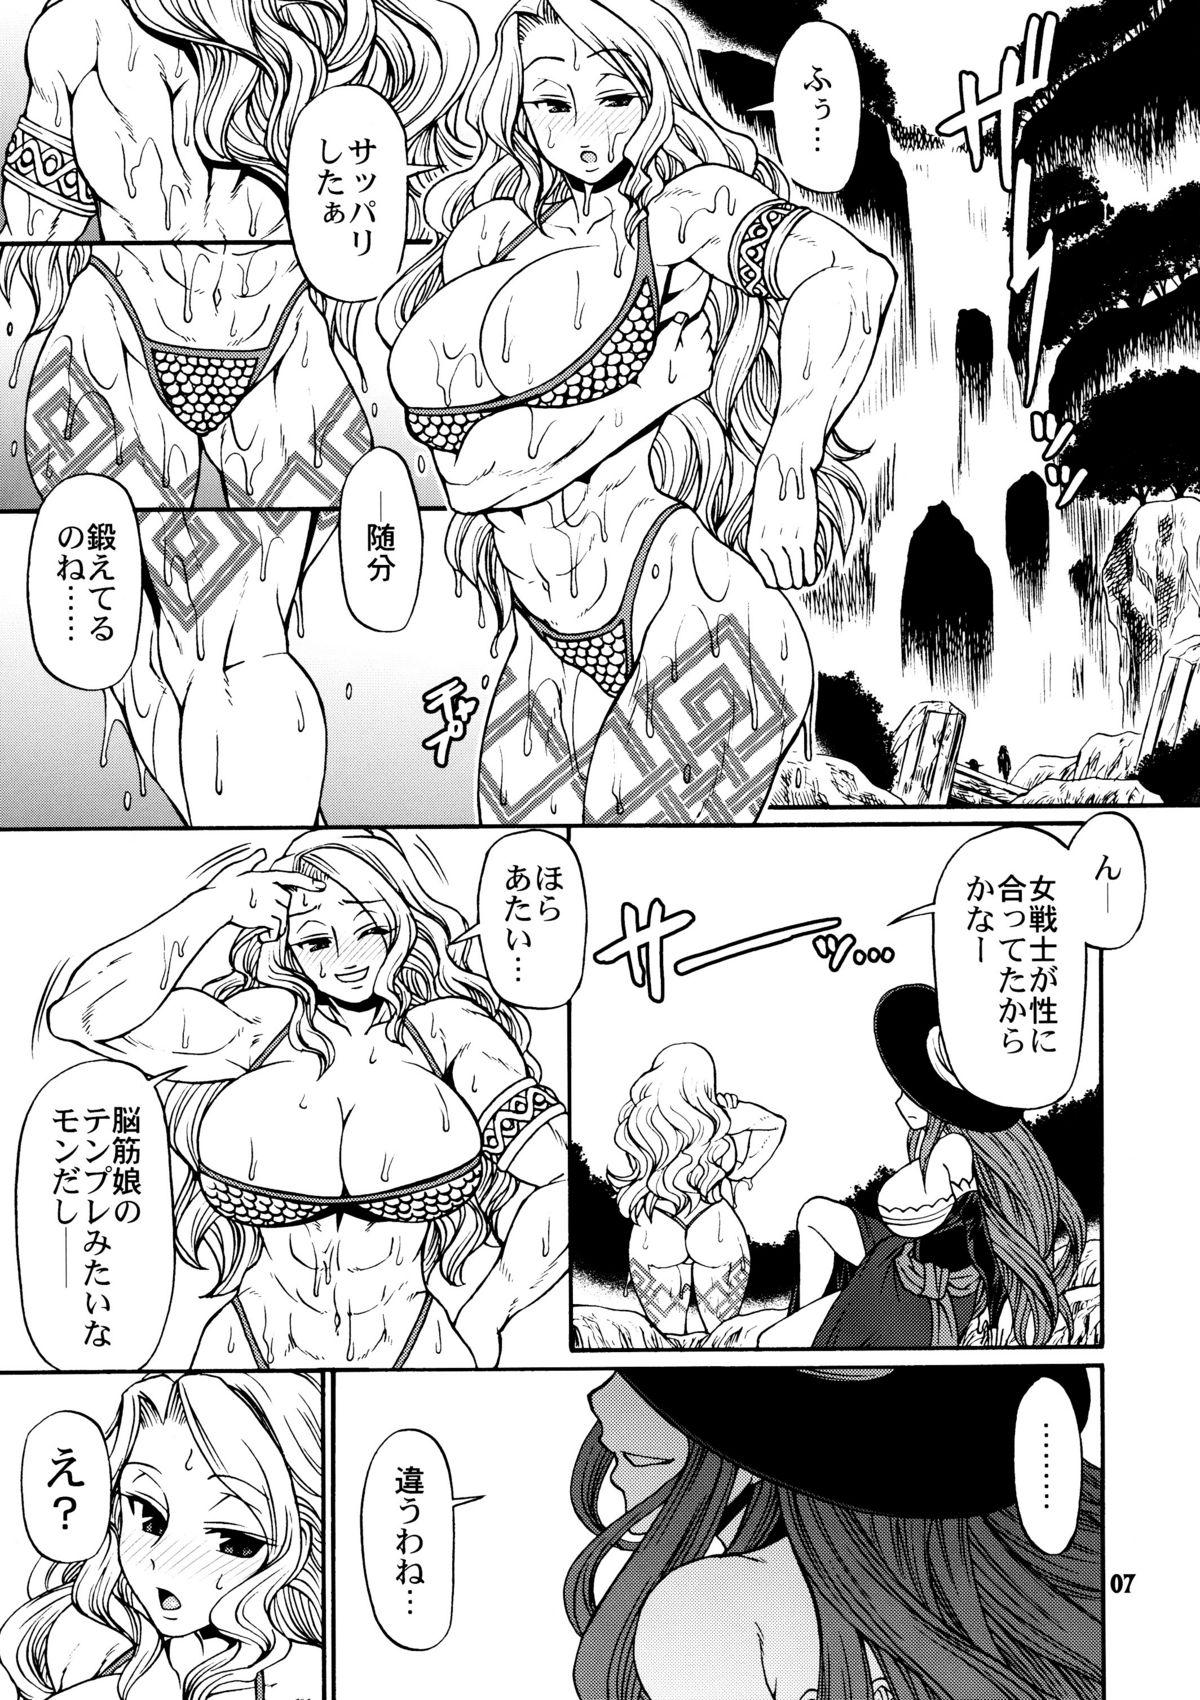 Cam PARTY HARD - Dragons crown Free Blowjobs - Page 6